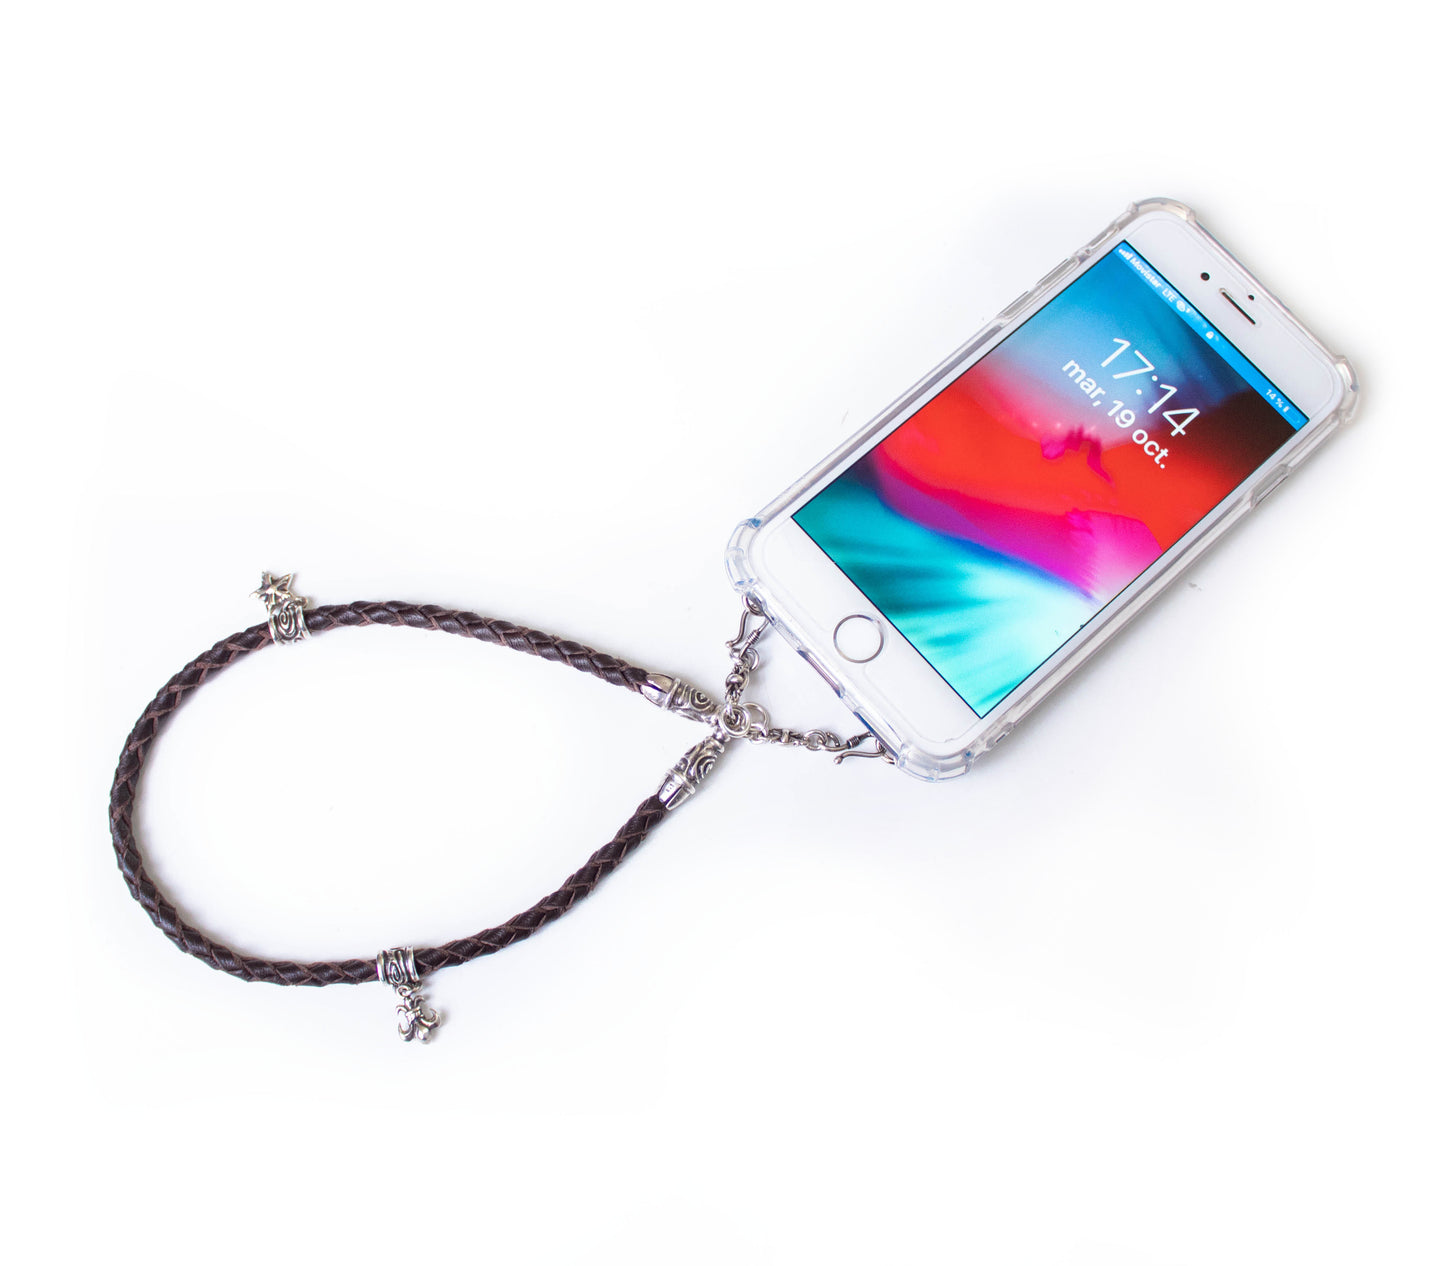 Full-Grain Genuine vegetable-tanned Leather & 925 Sterling Silver Case for iPhone. Brown Genuine Leather Bracelet/Choker/Strap 4 hand-braided strands.- F02